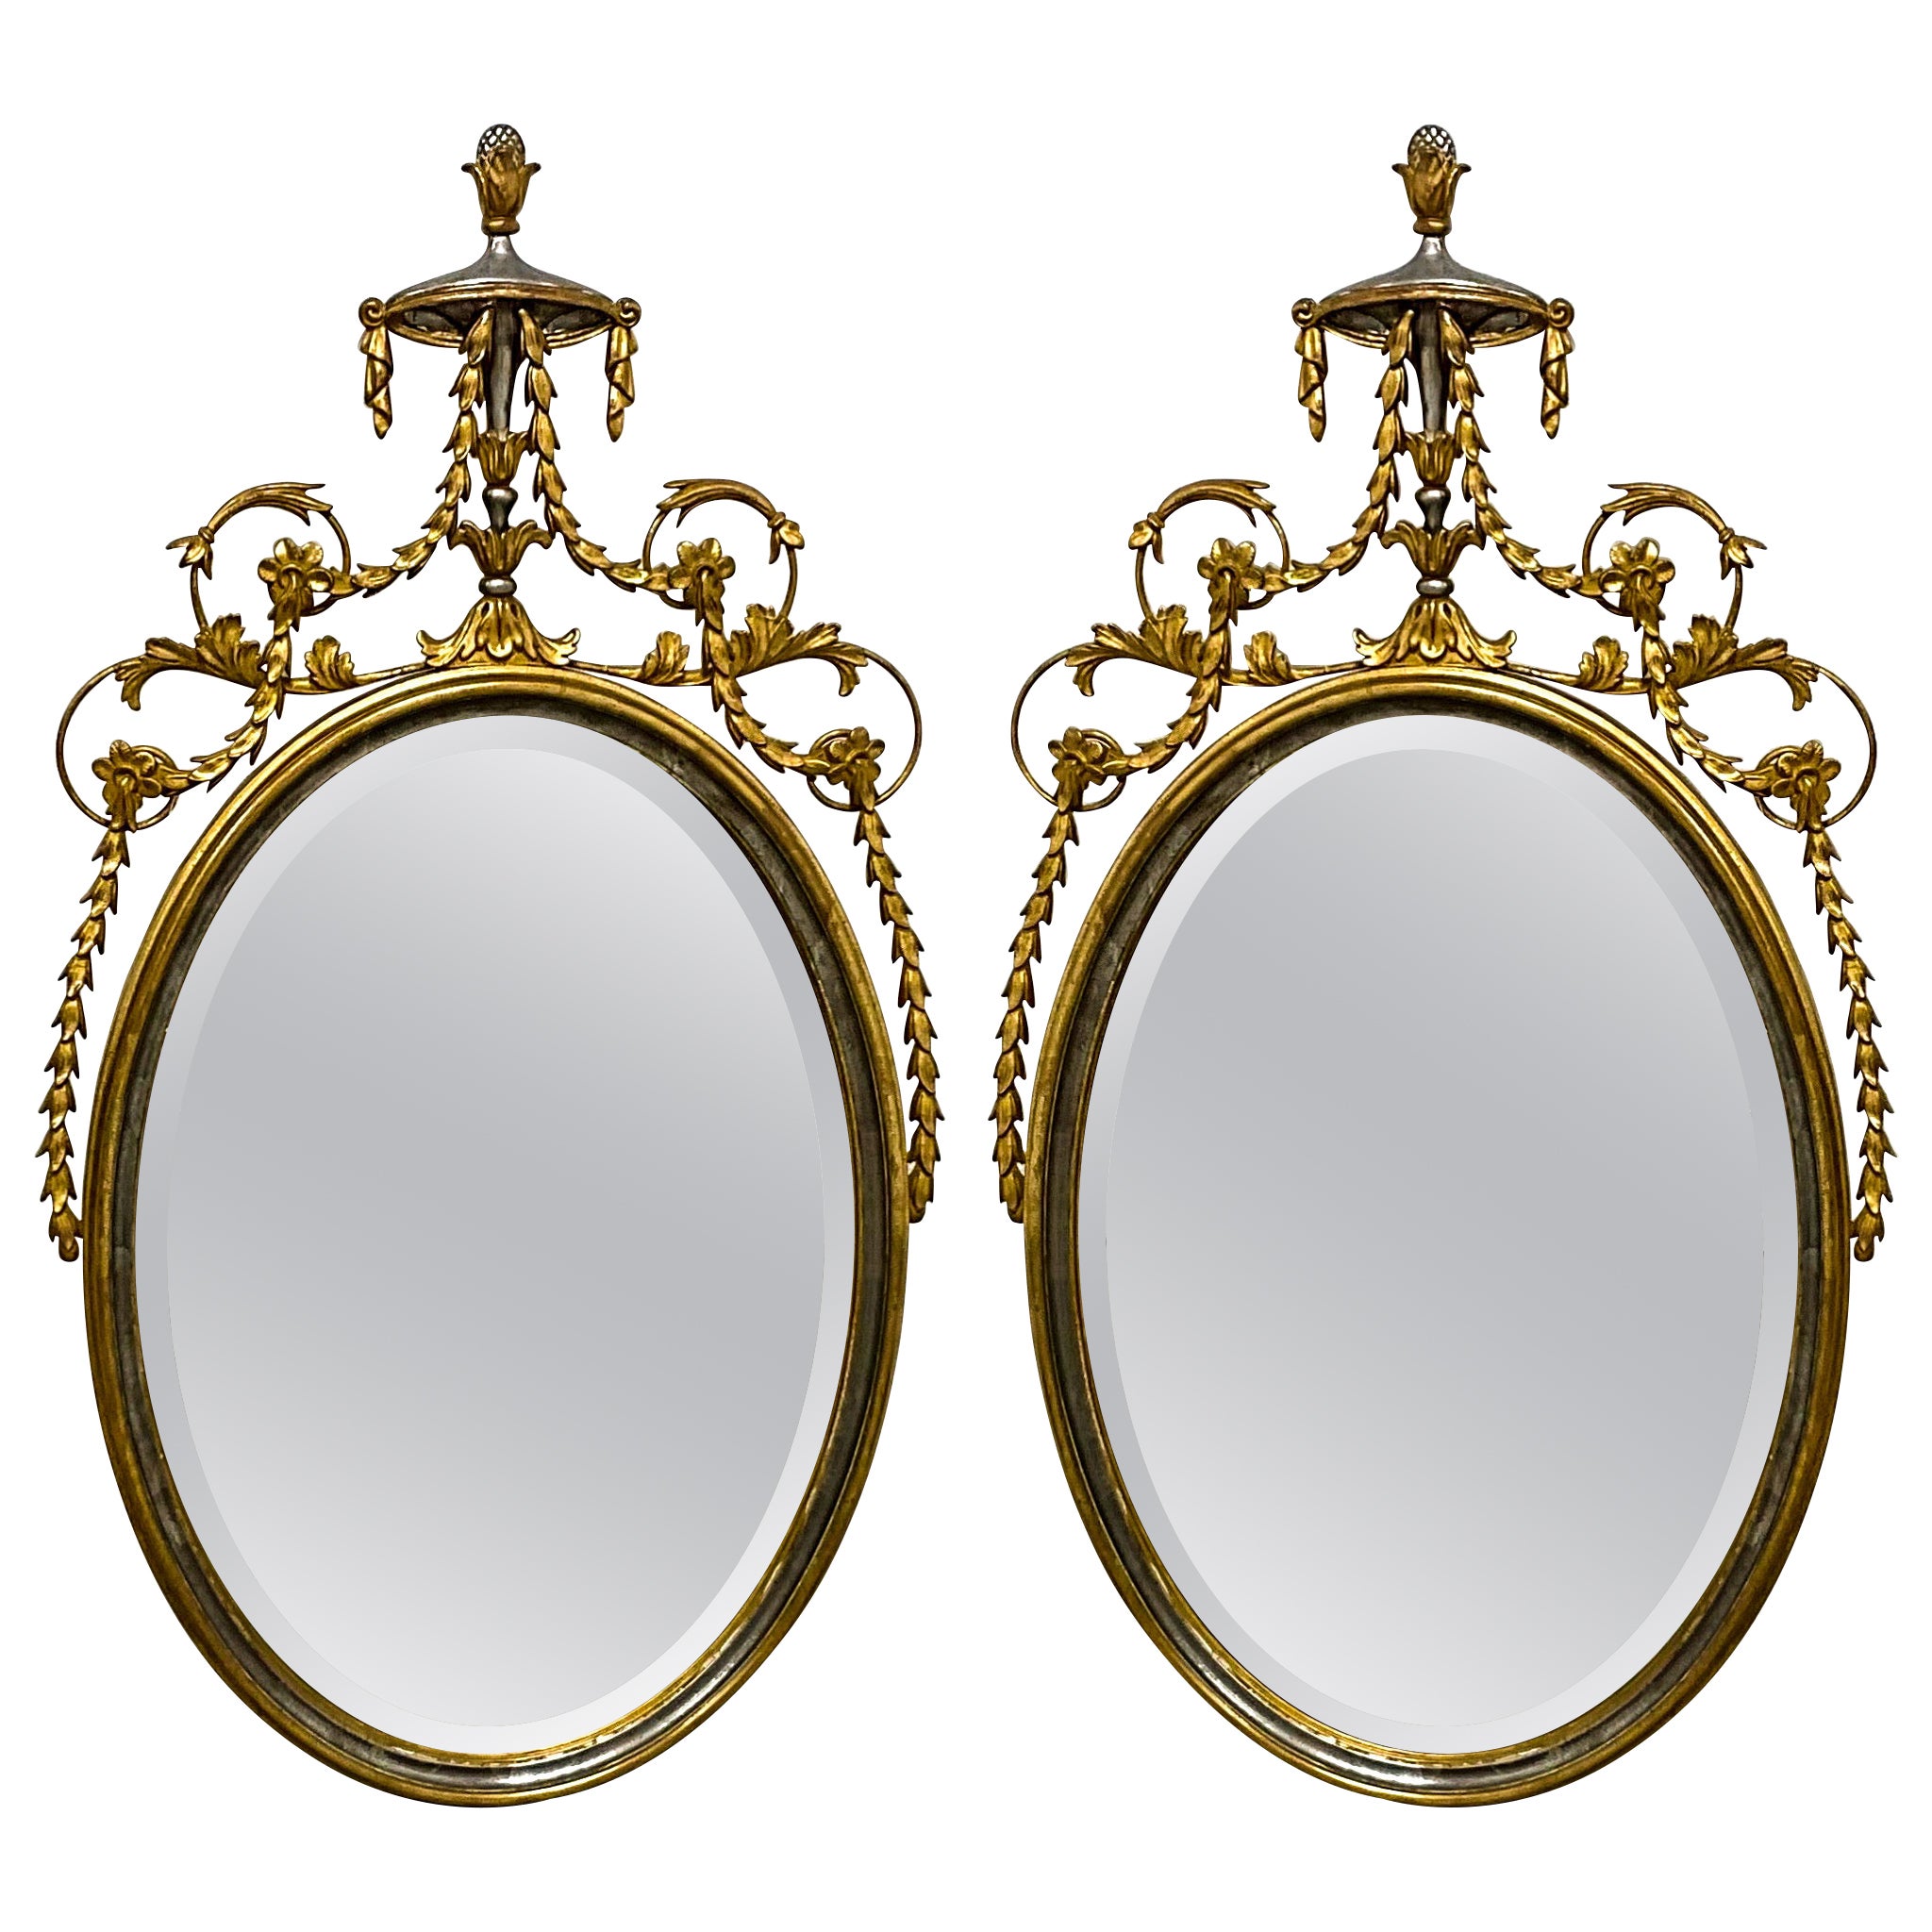 1960s Adam Style Silver / Gold Giltwood Oval Mirrors  Att. Friedman Bros, Pair For Sale